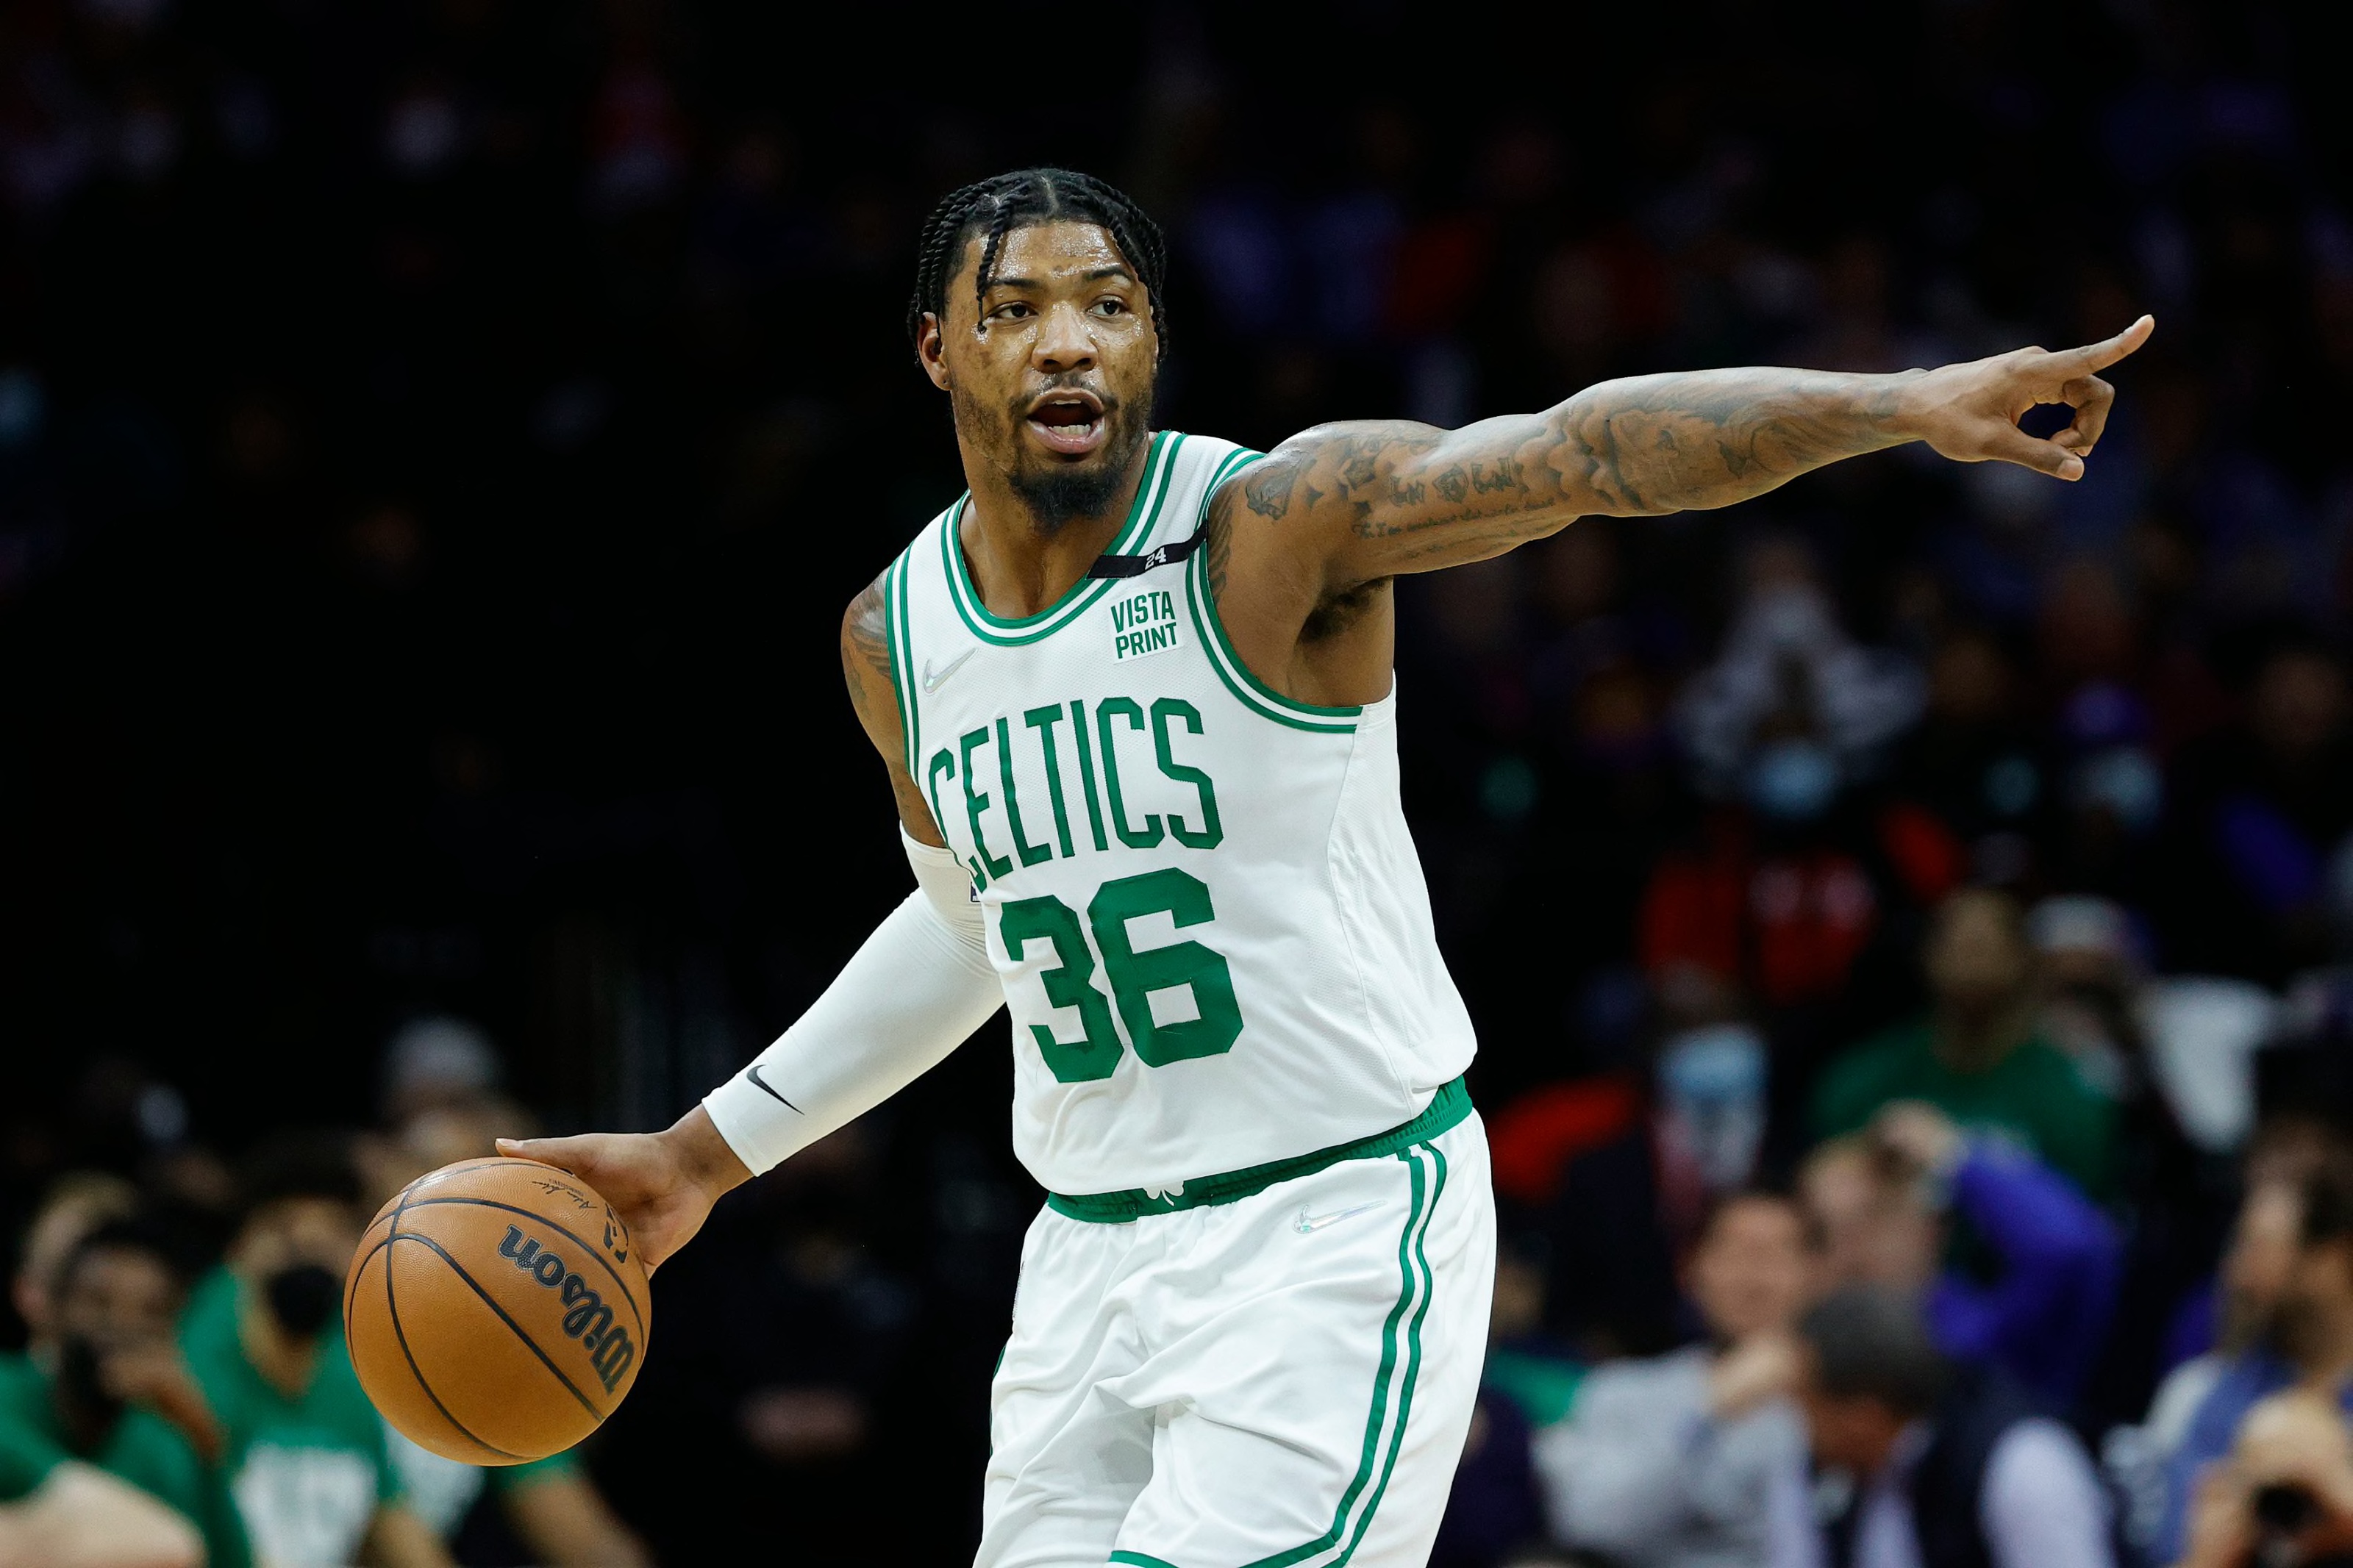 Marcus Smart is the undeniable leader of the Boston Celtics